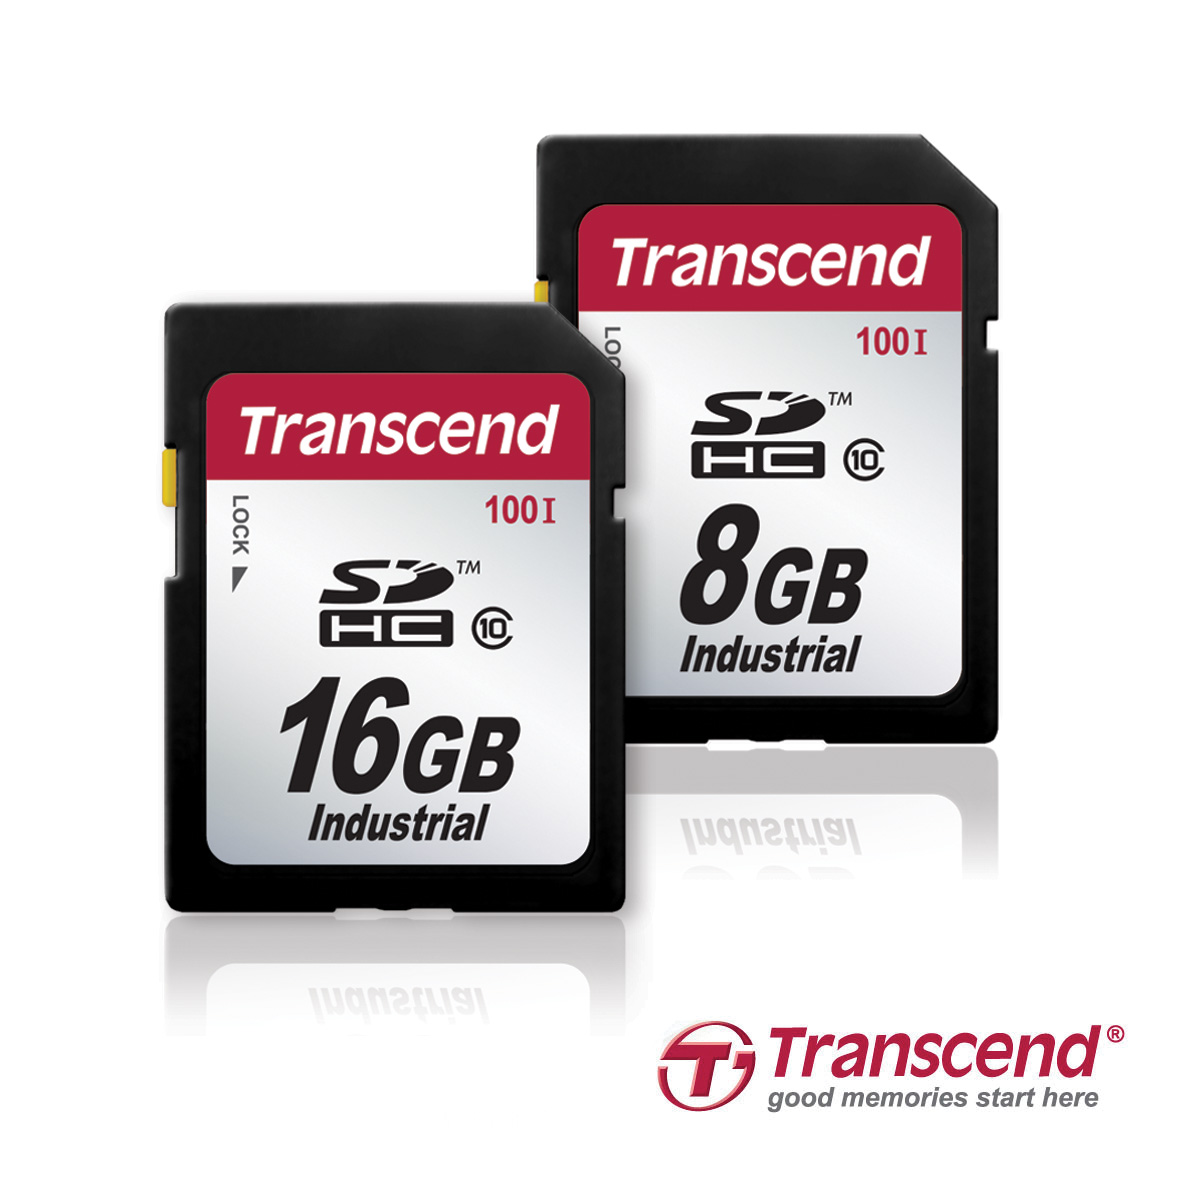 transcend-releases-8gb-16gb-sdhc100i-memory-cards